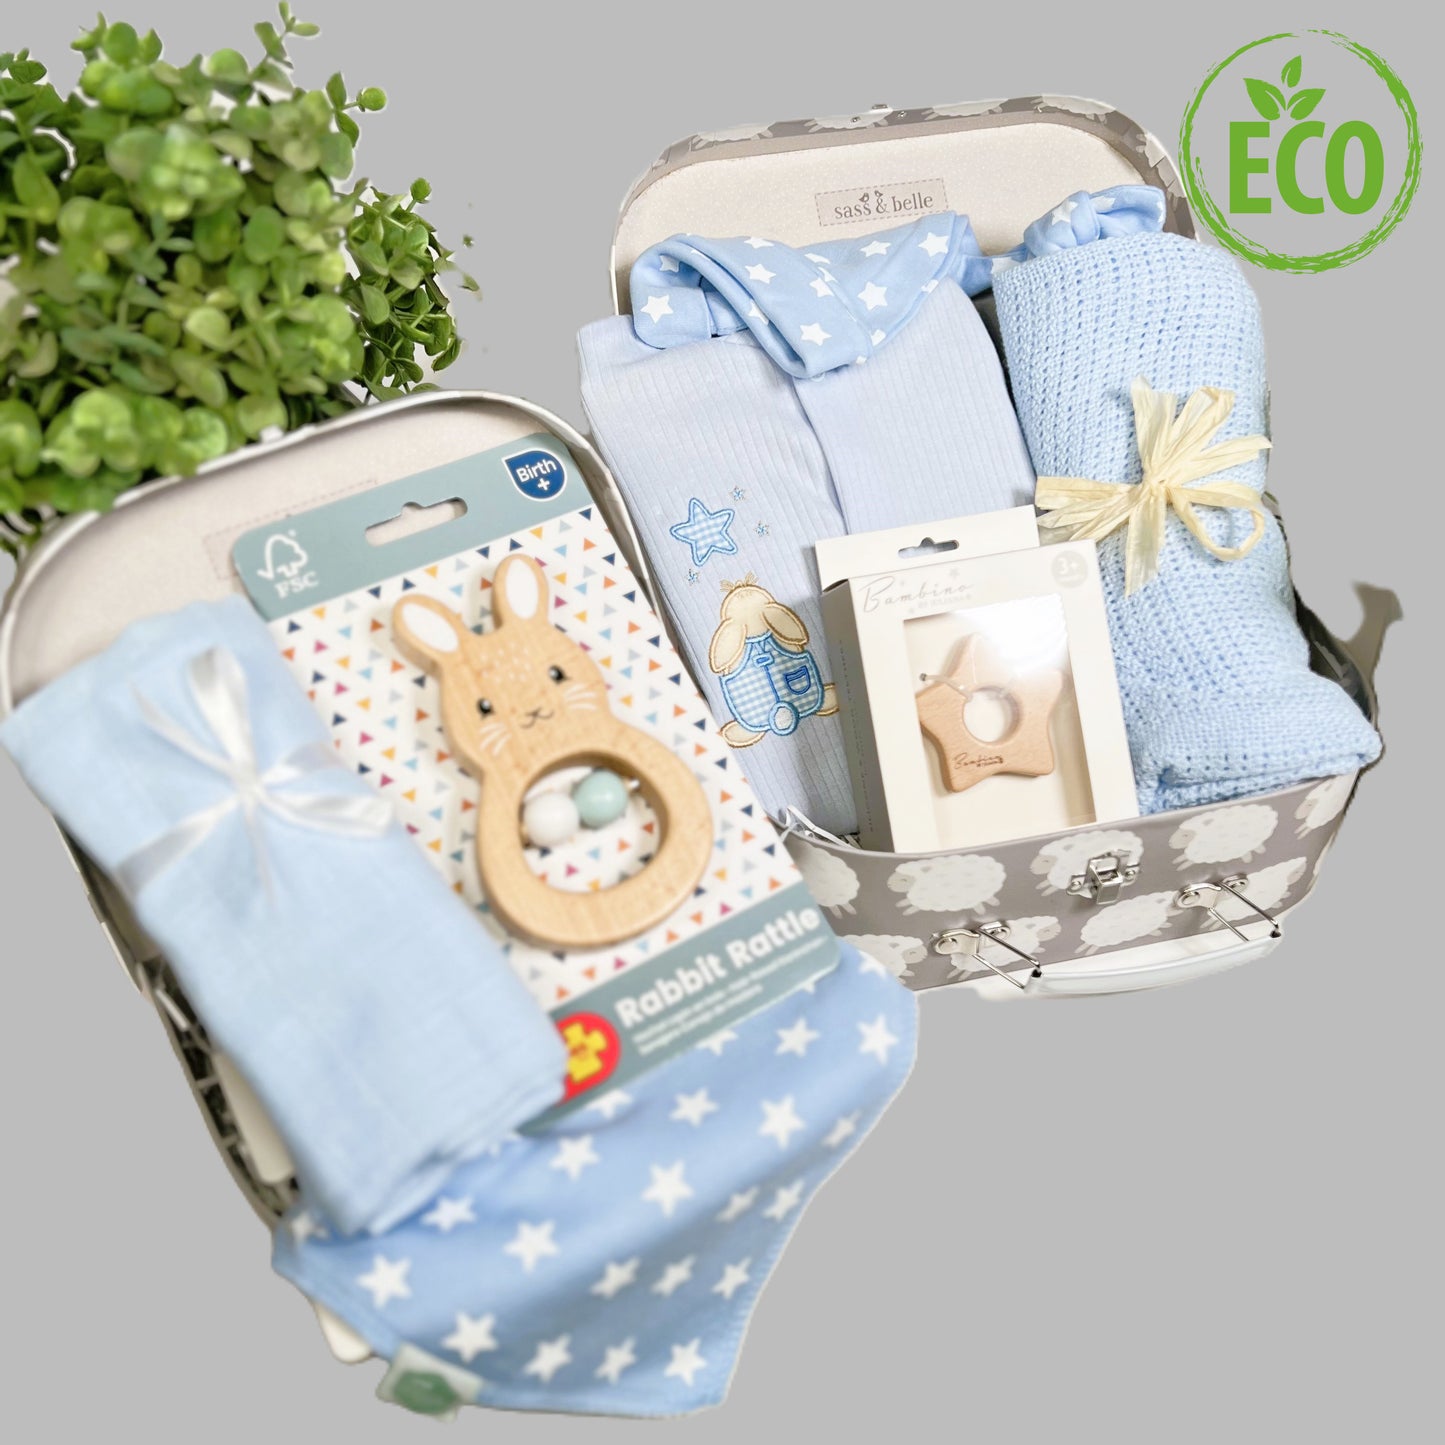 Two baby gift case containing a blue cotton cellular baby blanket, a blue muslinsqaure, a FSC wooden baby rattle, a Bambino wooden teething star, a baby knot hat and matching blue and white dribble bib and cotton blue ribbed sleepsuit with applique bunny motif.